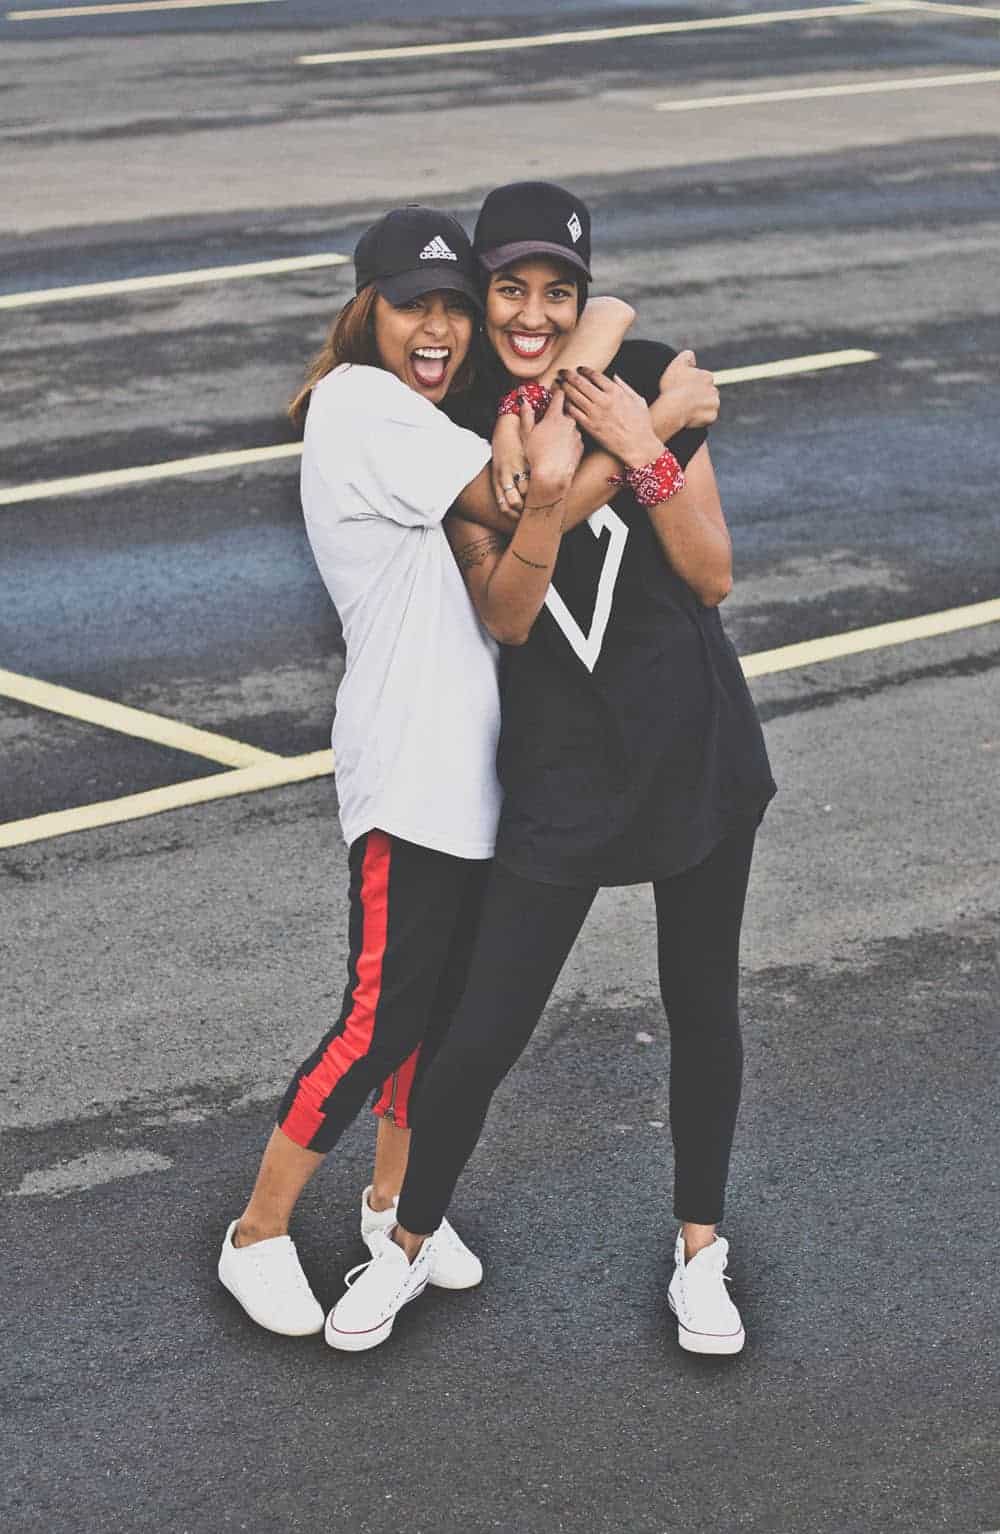 Two people hugging, wearing athletic clothes and white sneakers